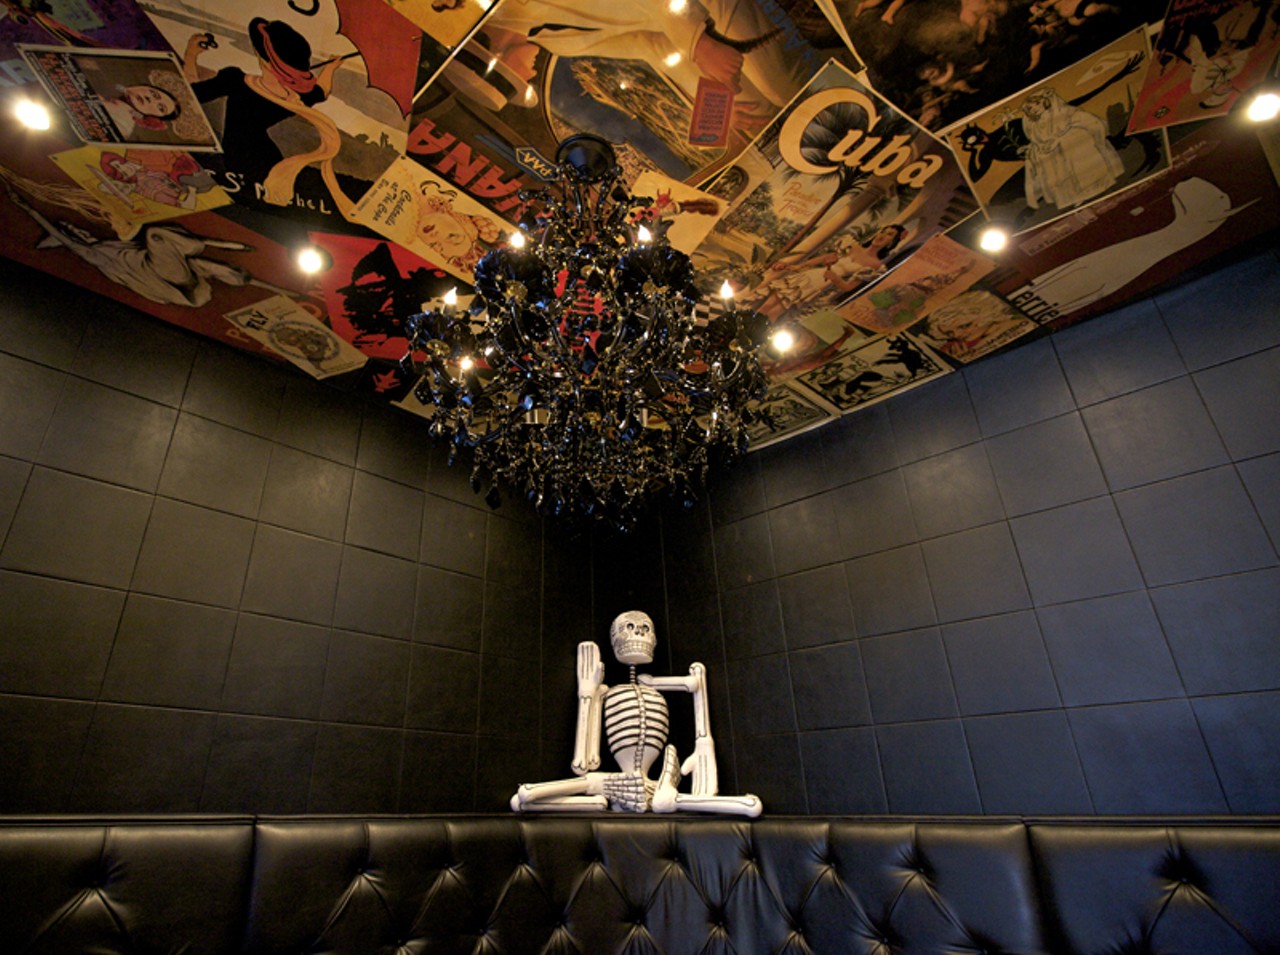 The very dark Sanctuaria, with some of its walls painted black, has a &ldquo;Day of the Dead&rdquo; overtone.